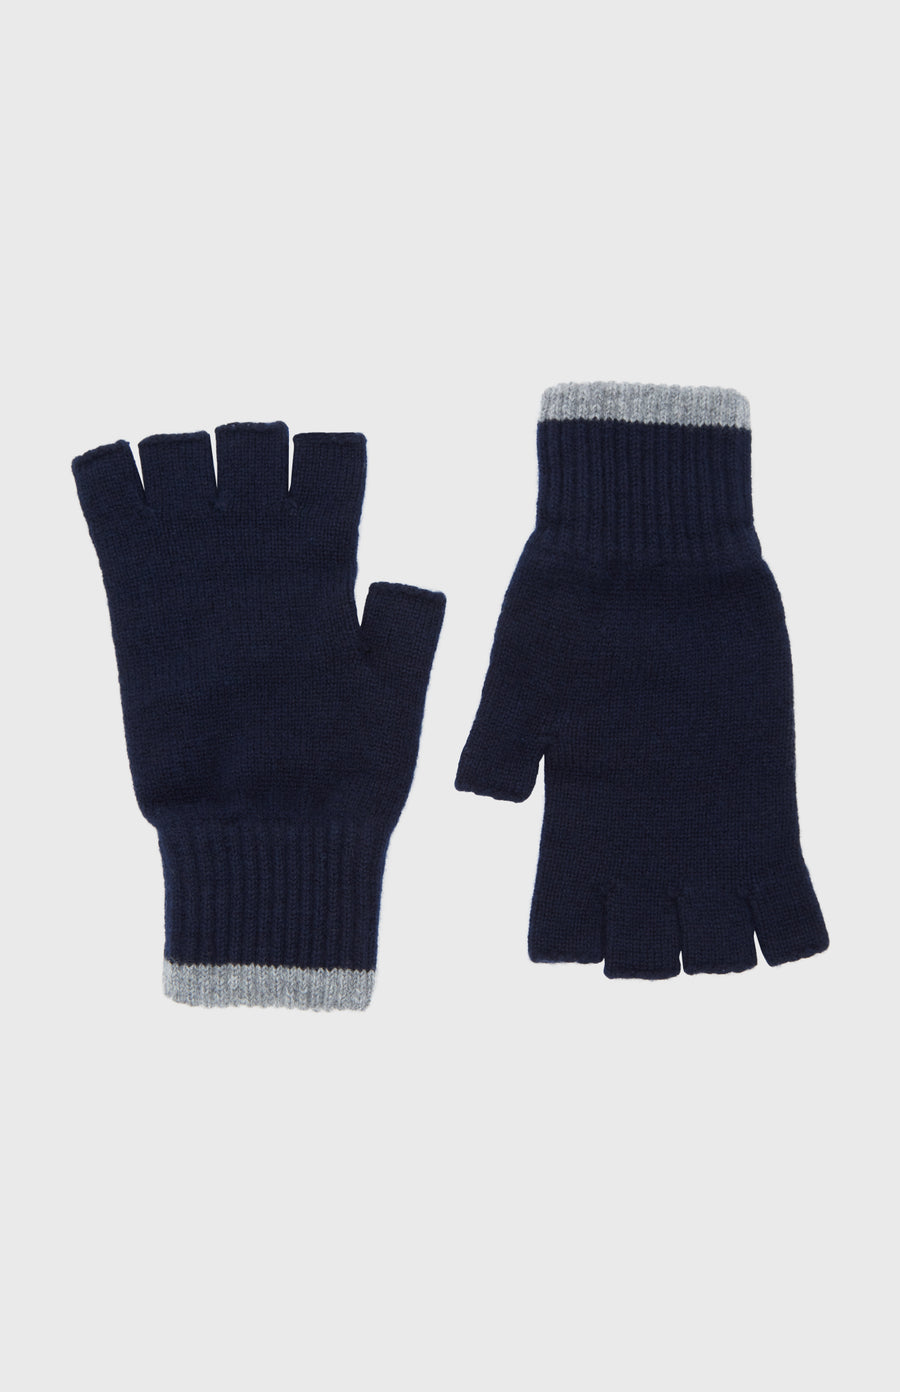 Cashmere Fingerless Gloves in Ink and Flannel Grey - Pringle of Scotland